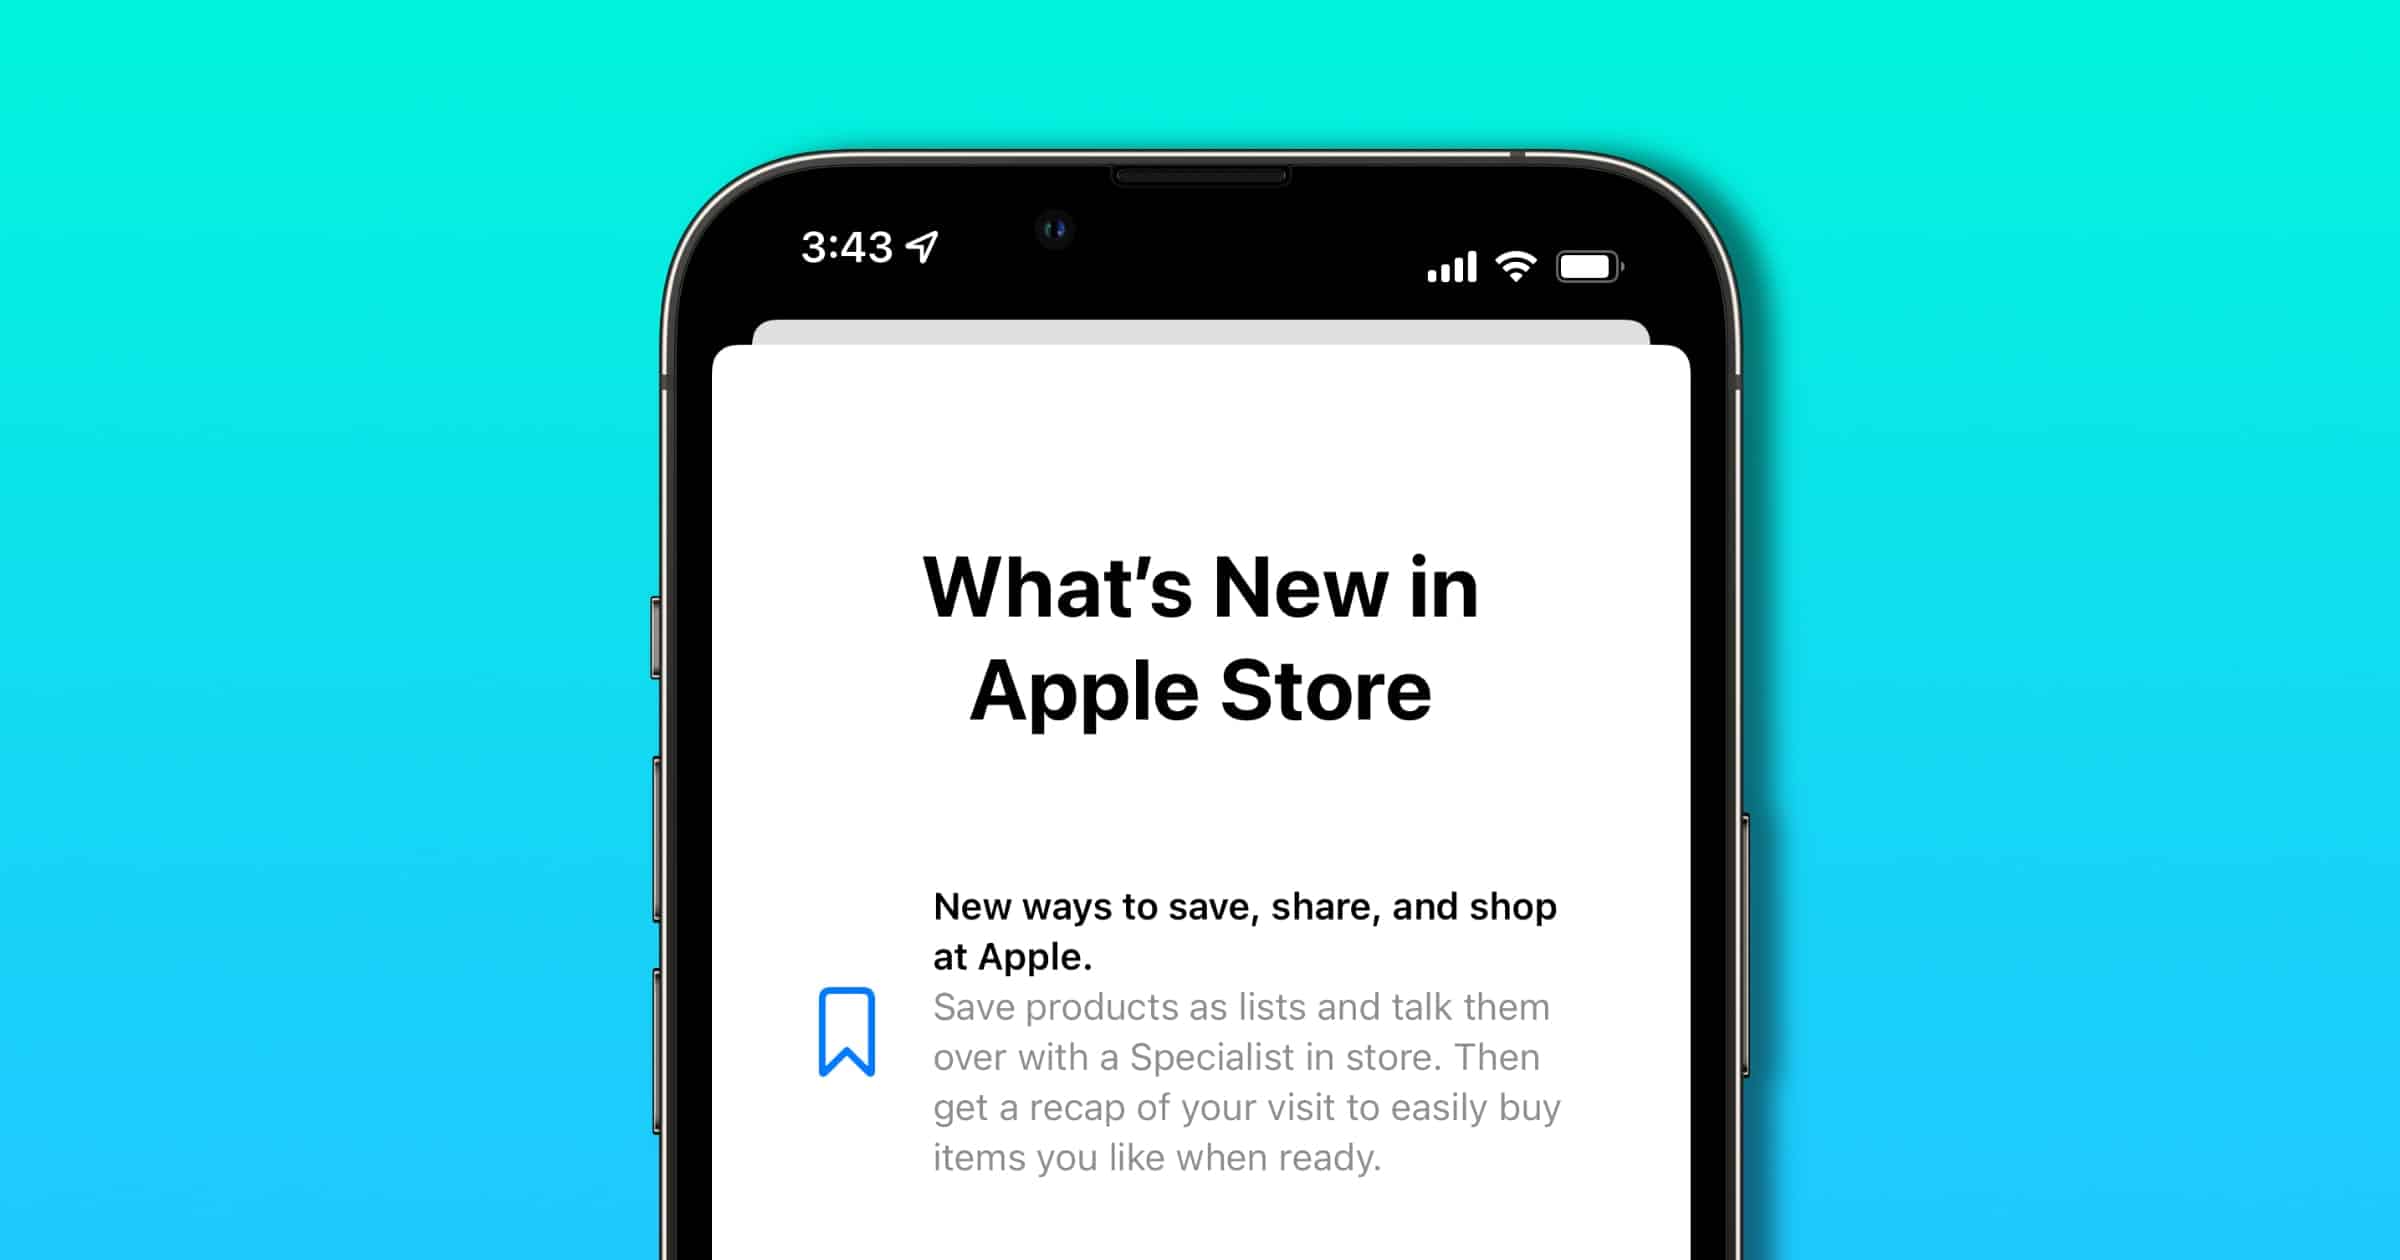 Update to Apple Store App Lets You Save Products to Lists